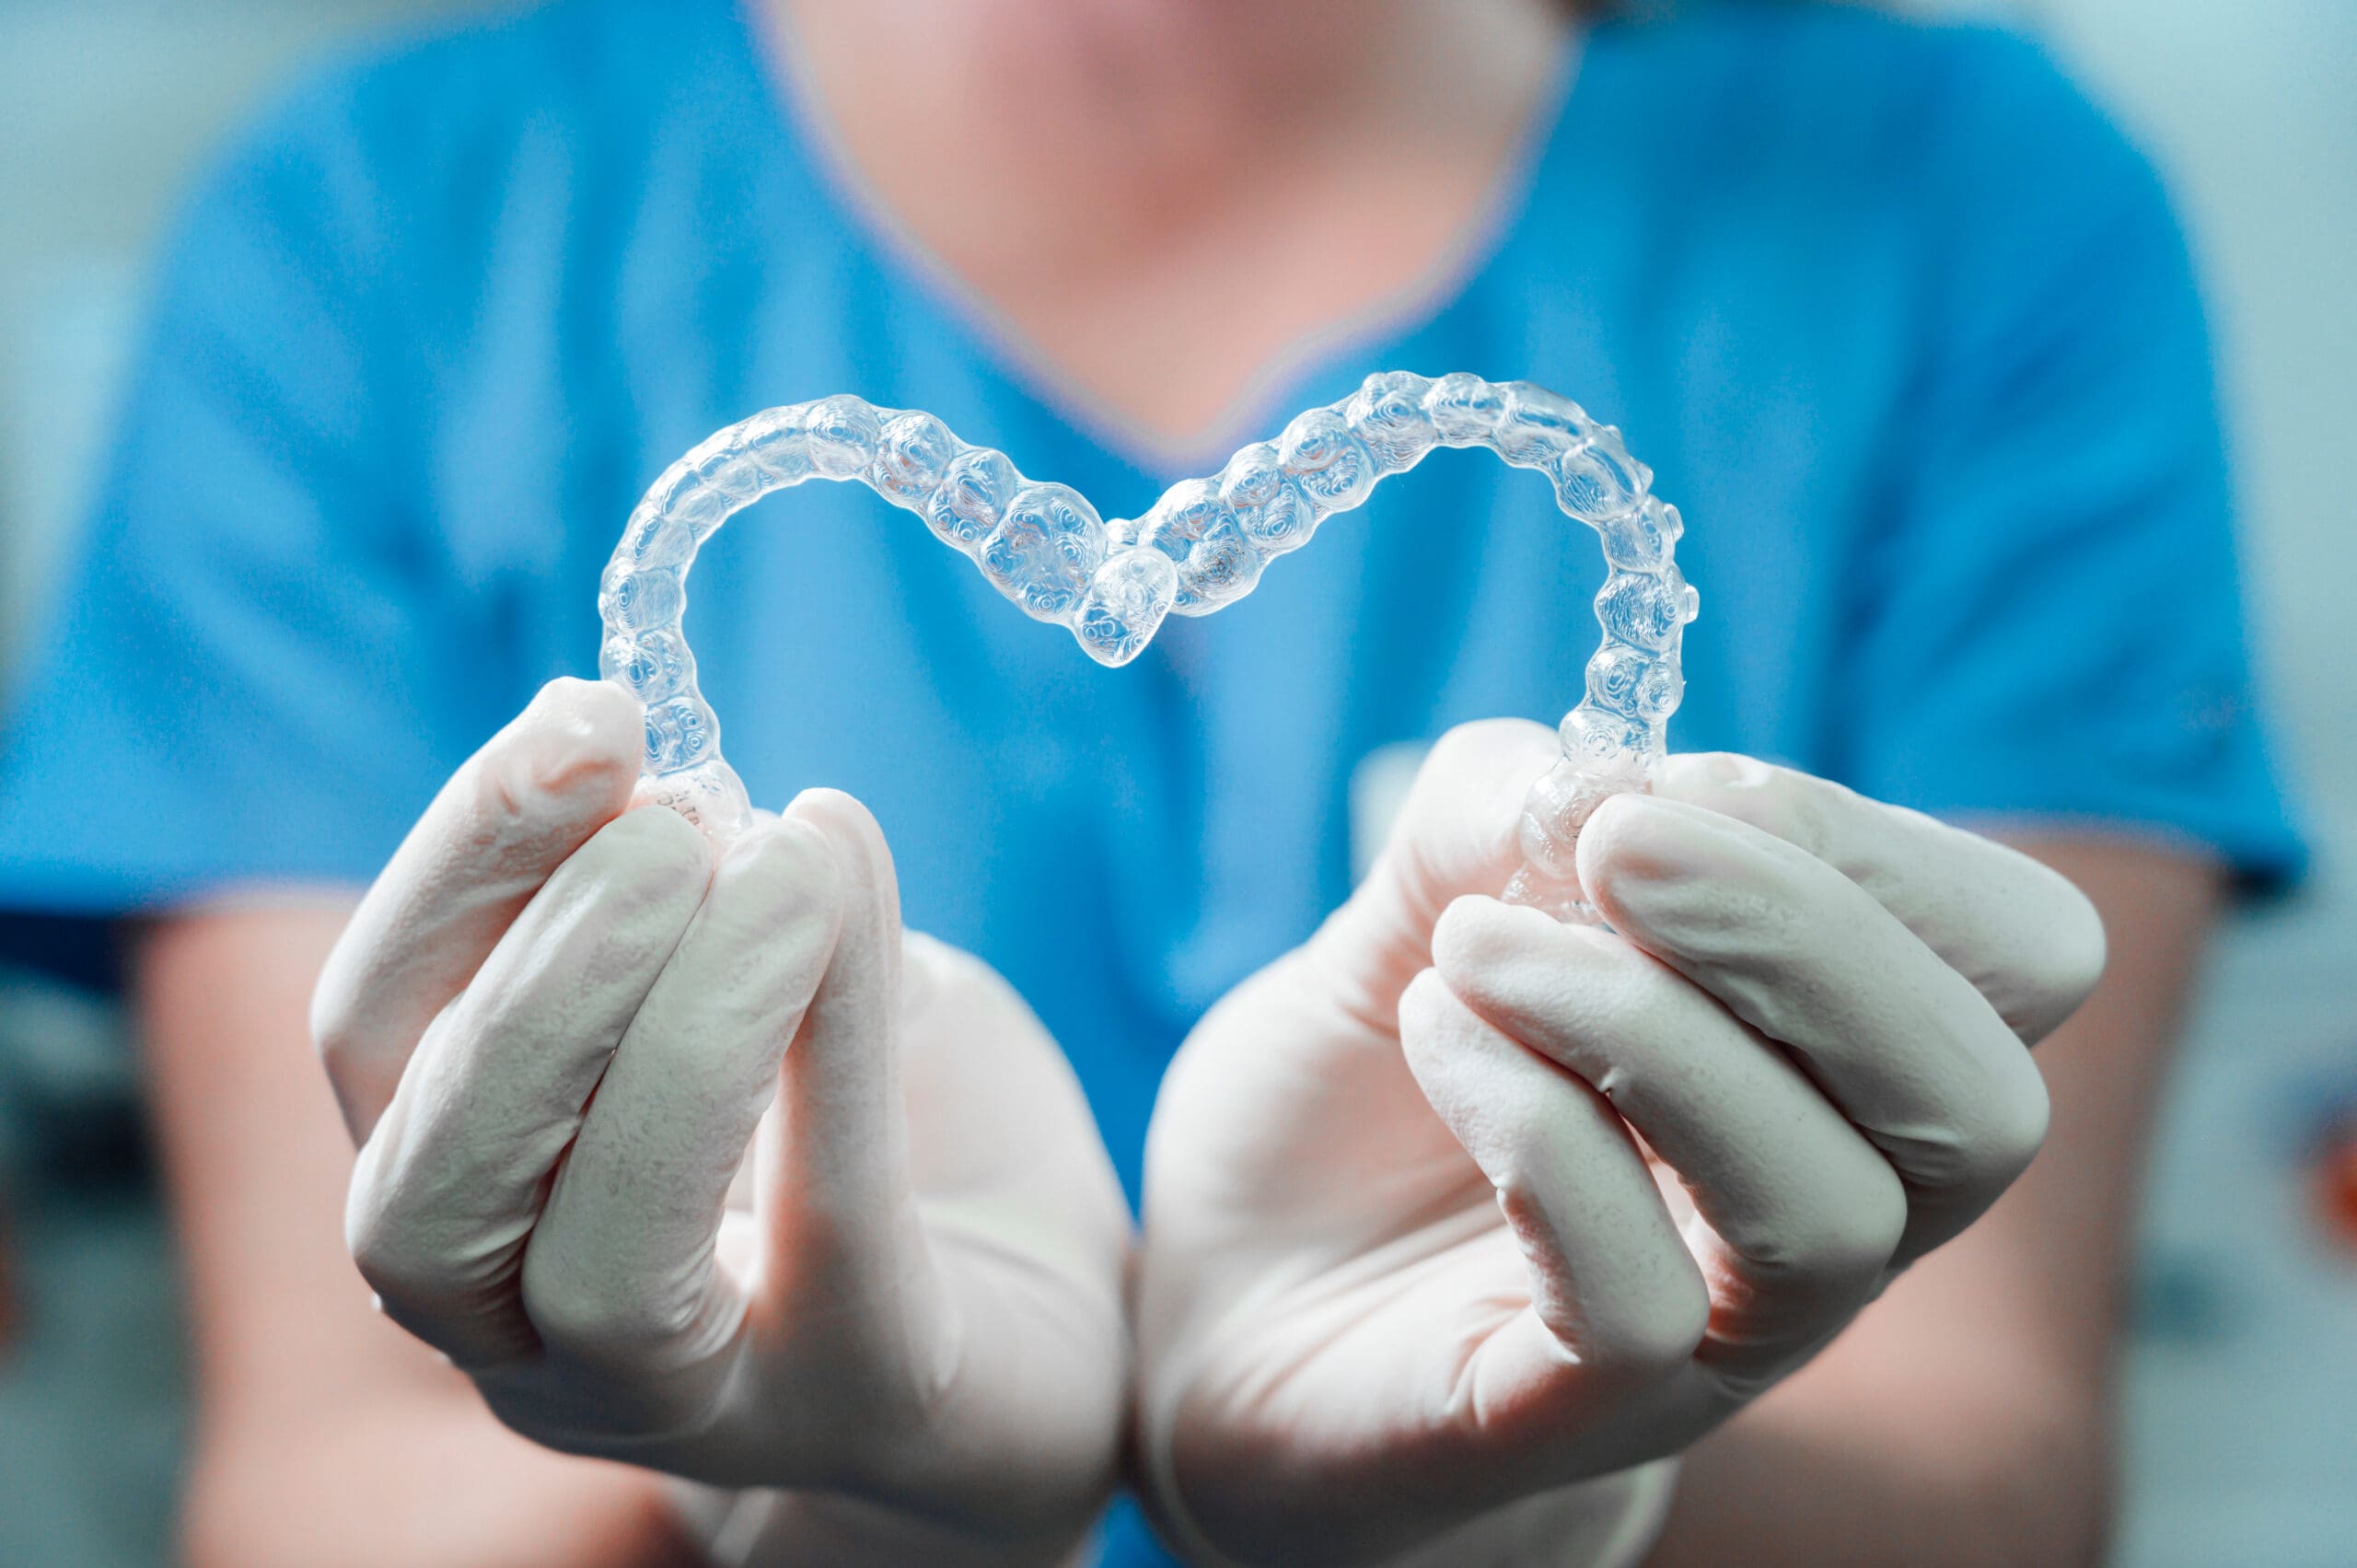 A dentist showcasing invisalign clear aligners with a heart shaped brace.